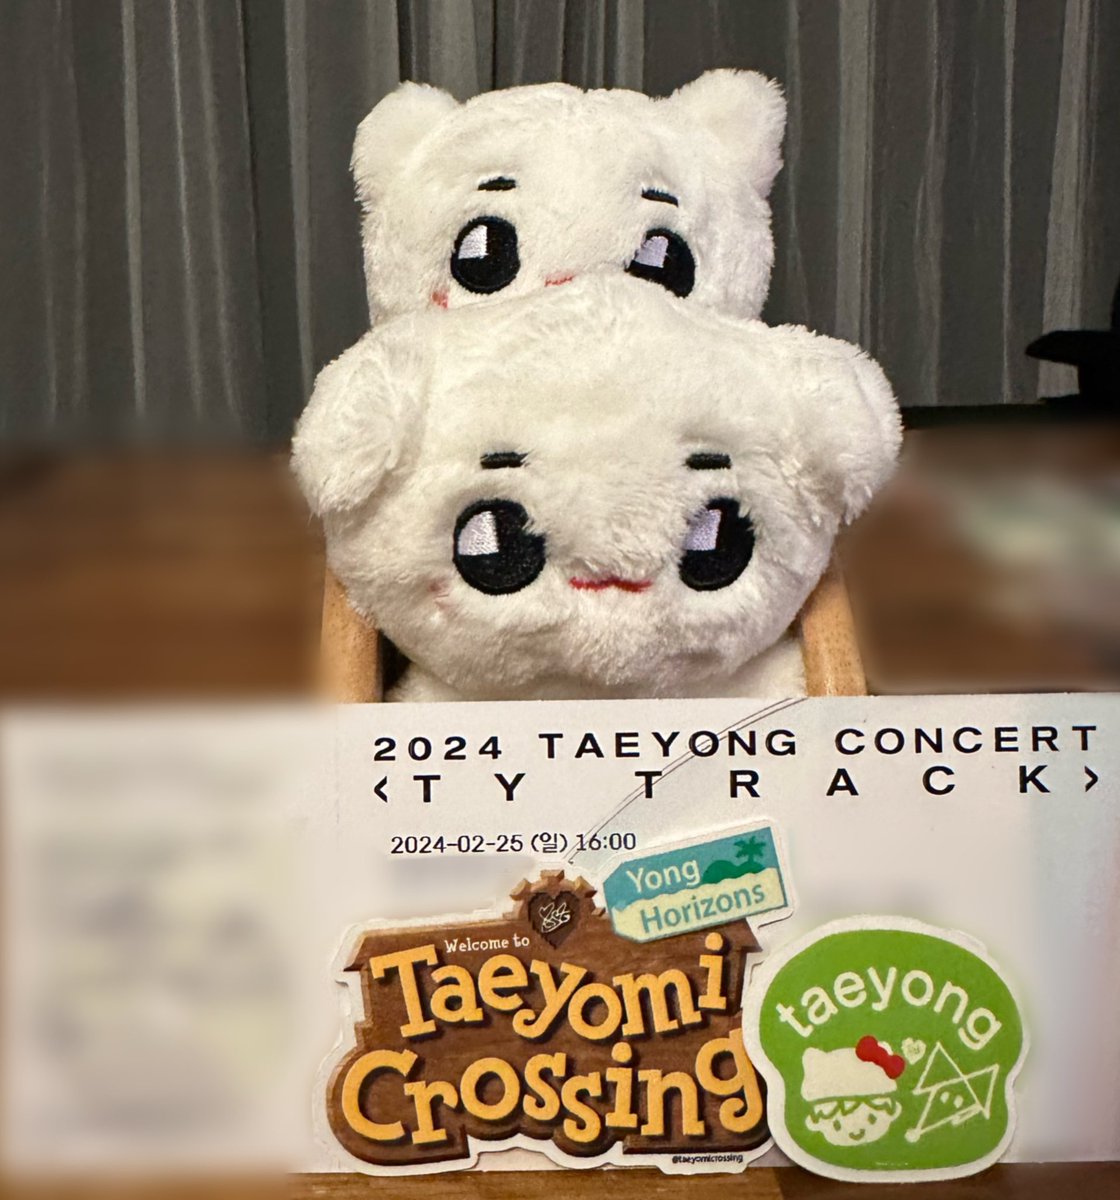 Our admins have landed in Seoul! Face Reveal! 🤯

We will be distributing 50 sets of Taeyomi Crossing and Taeyong stickers at TY Track on 2/24 and 2/25!

Location and time: TBA📍

#TAEYONG #태용 #TAEYONG_TAP #TY_TAP_FEB26 #TY_TRACK #TAEYONG_TY_TRACK